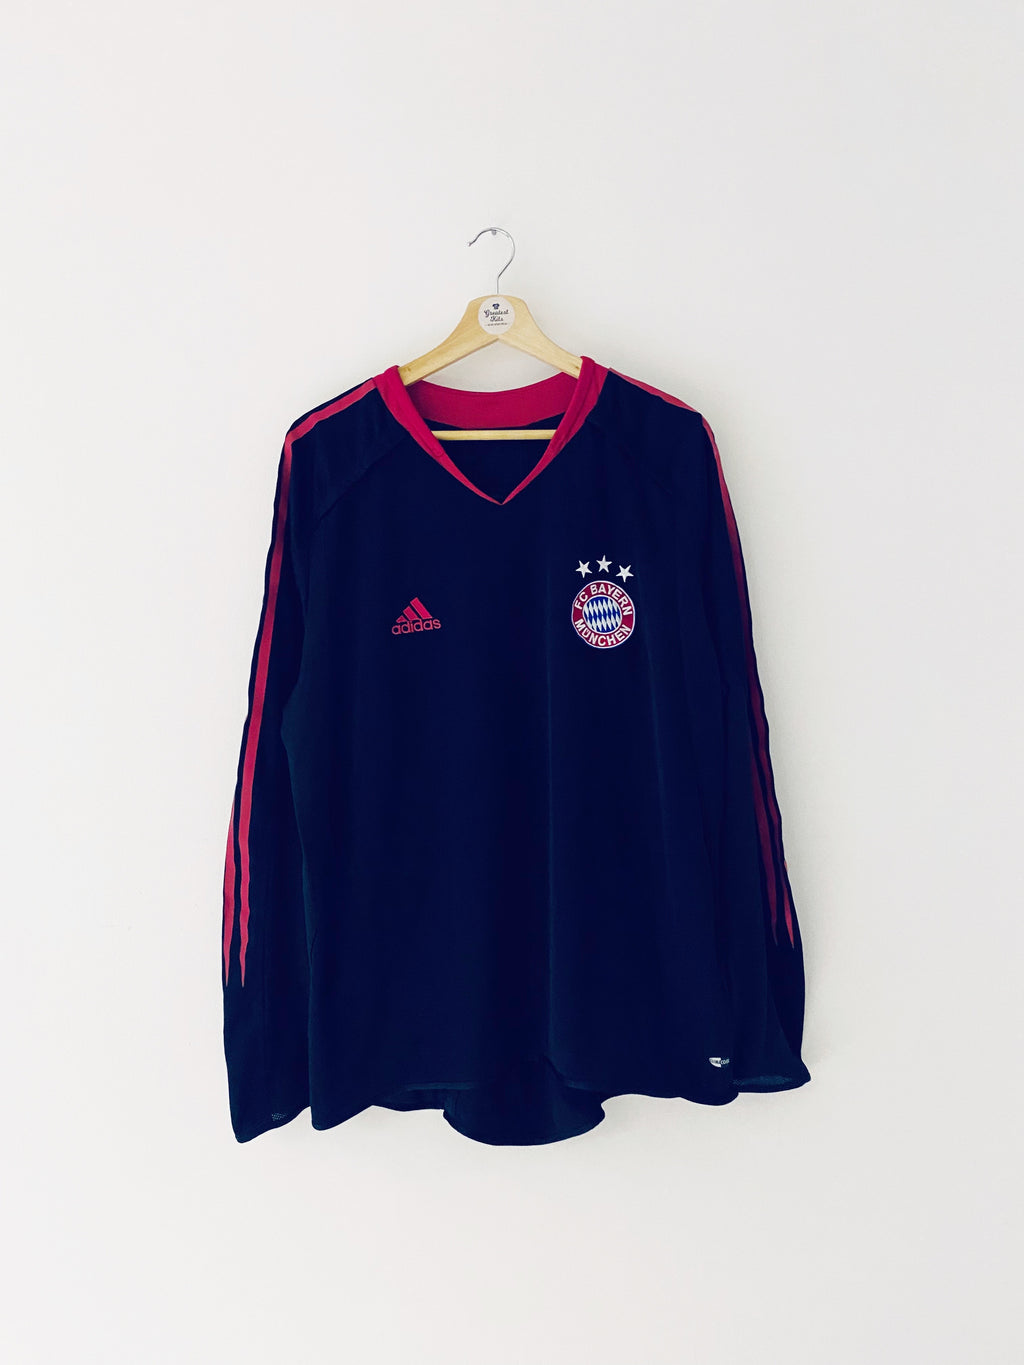 2004/05 Bayern Munich CL *Player Issue* Maillot L/S (XL) 9/10 